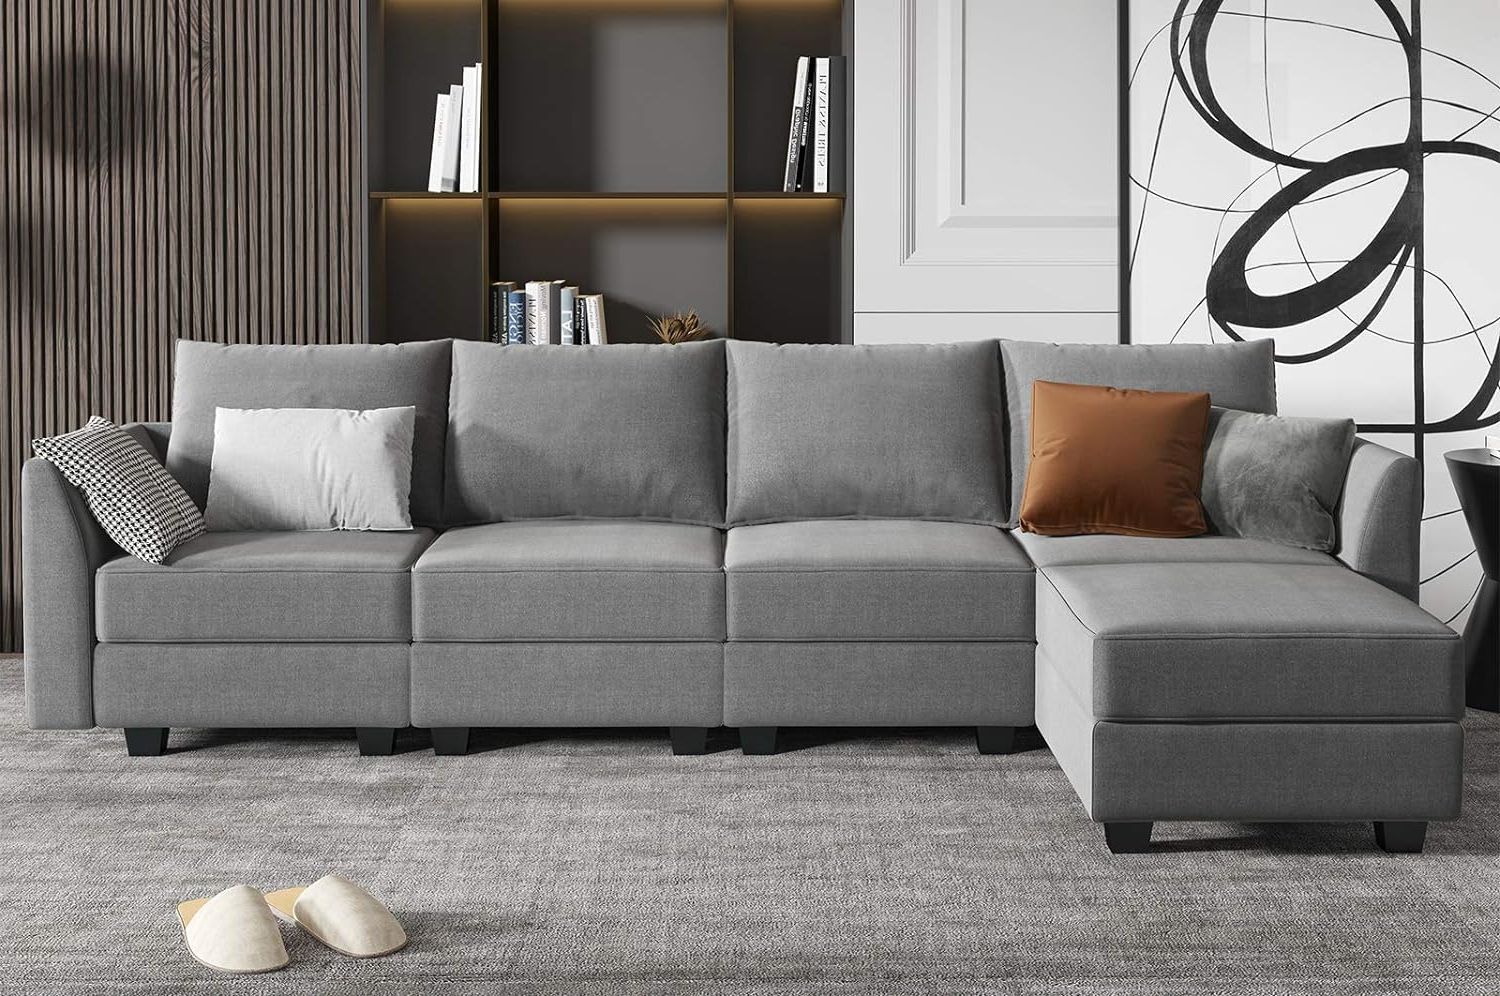 Most Popular L Shape Couches With Reversible Chaises Throughout Buy Honbay Grey Sectional Couch With Reversible Chaise Modern L Shape (View 11 of 15)